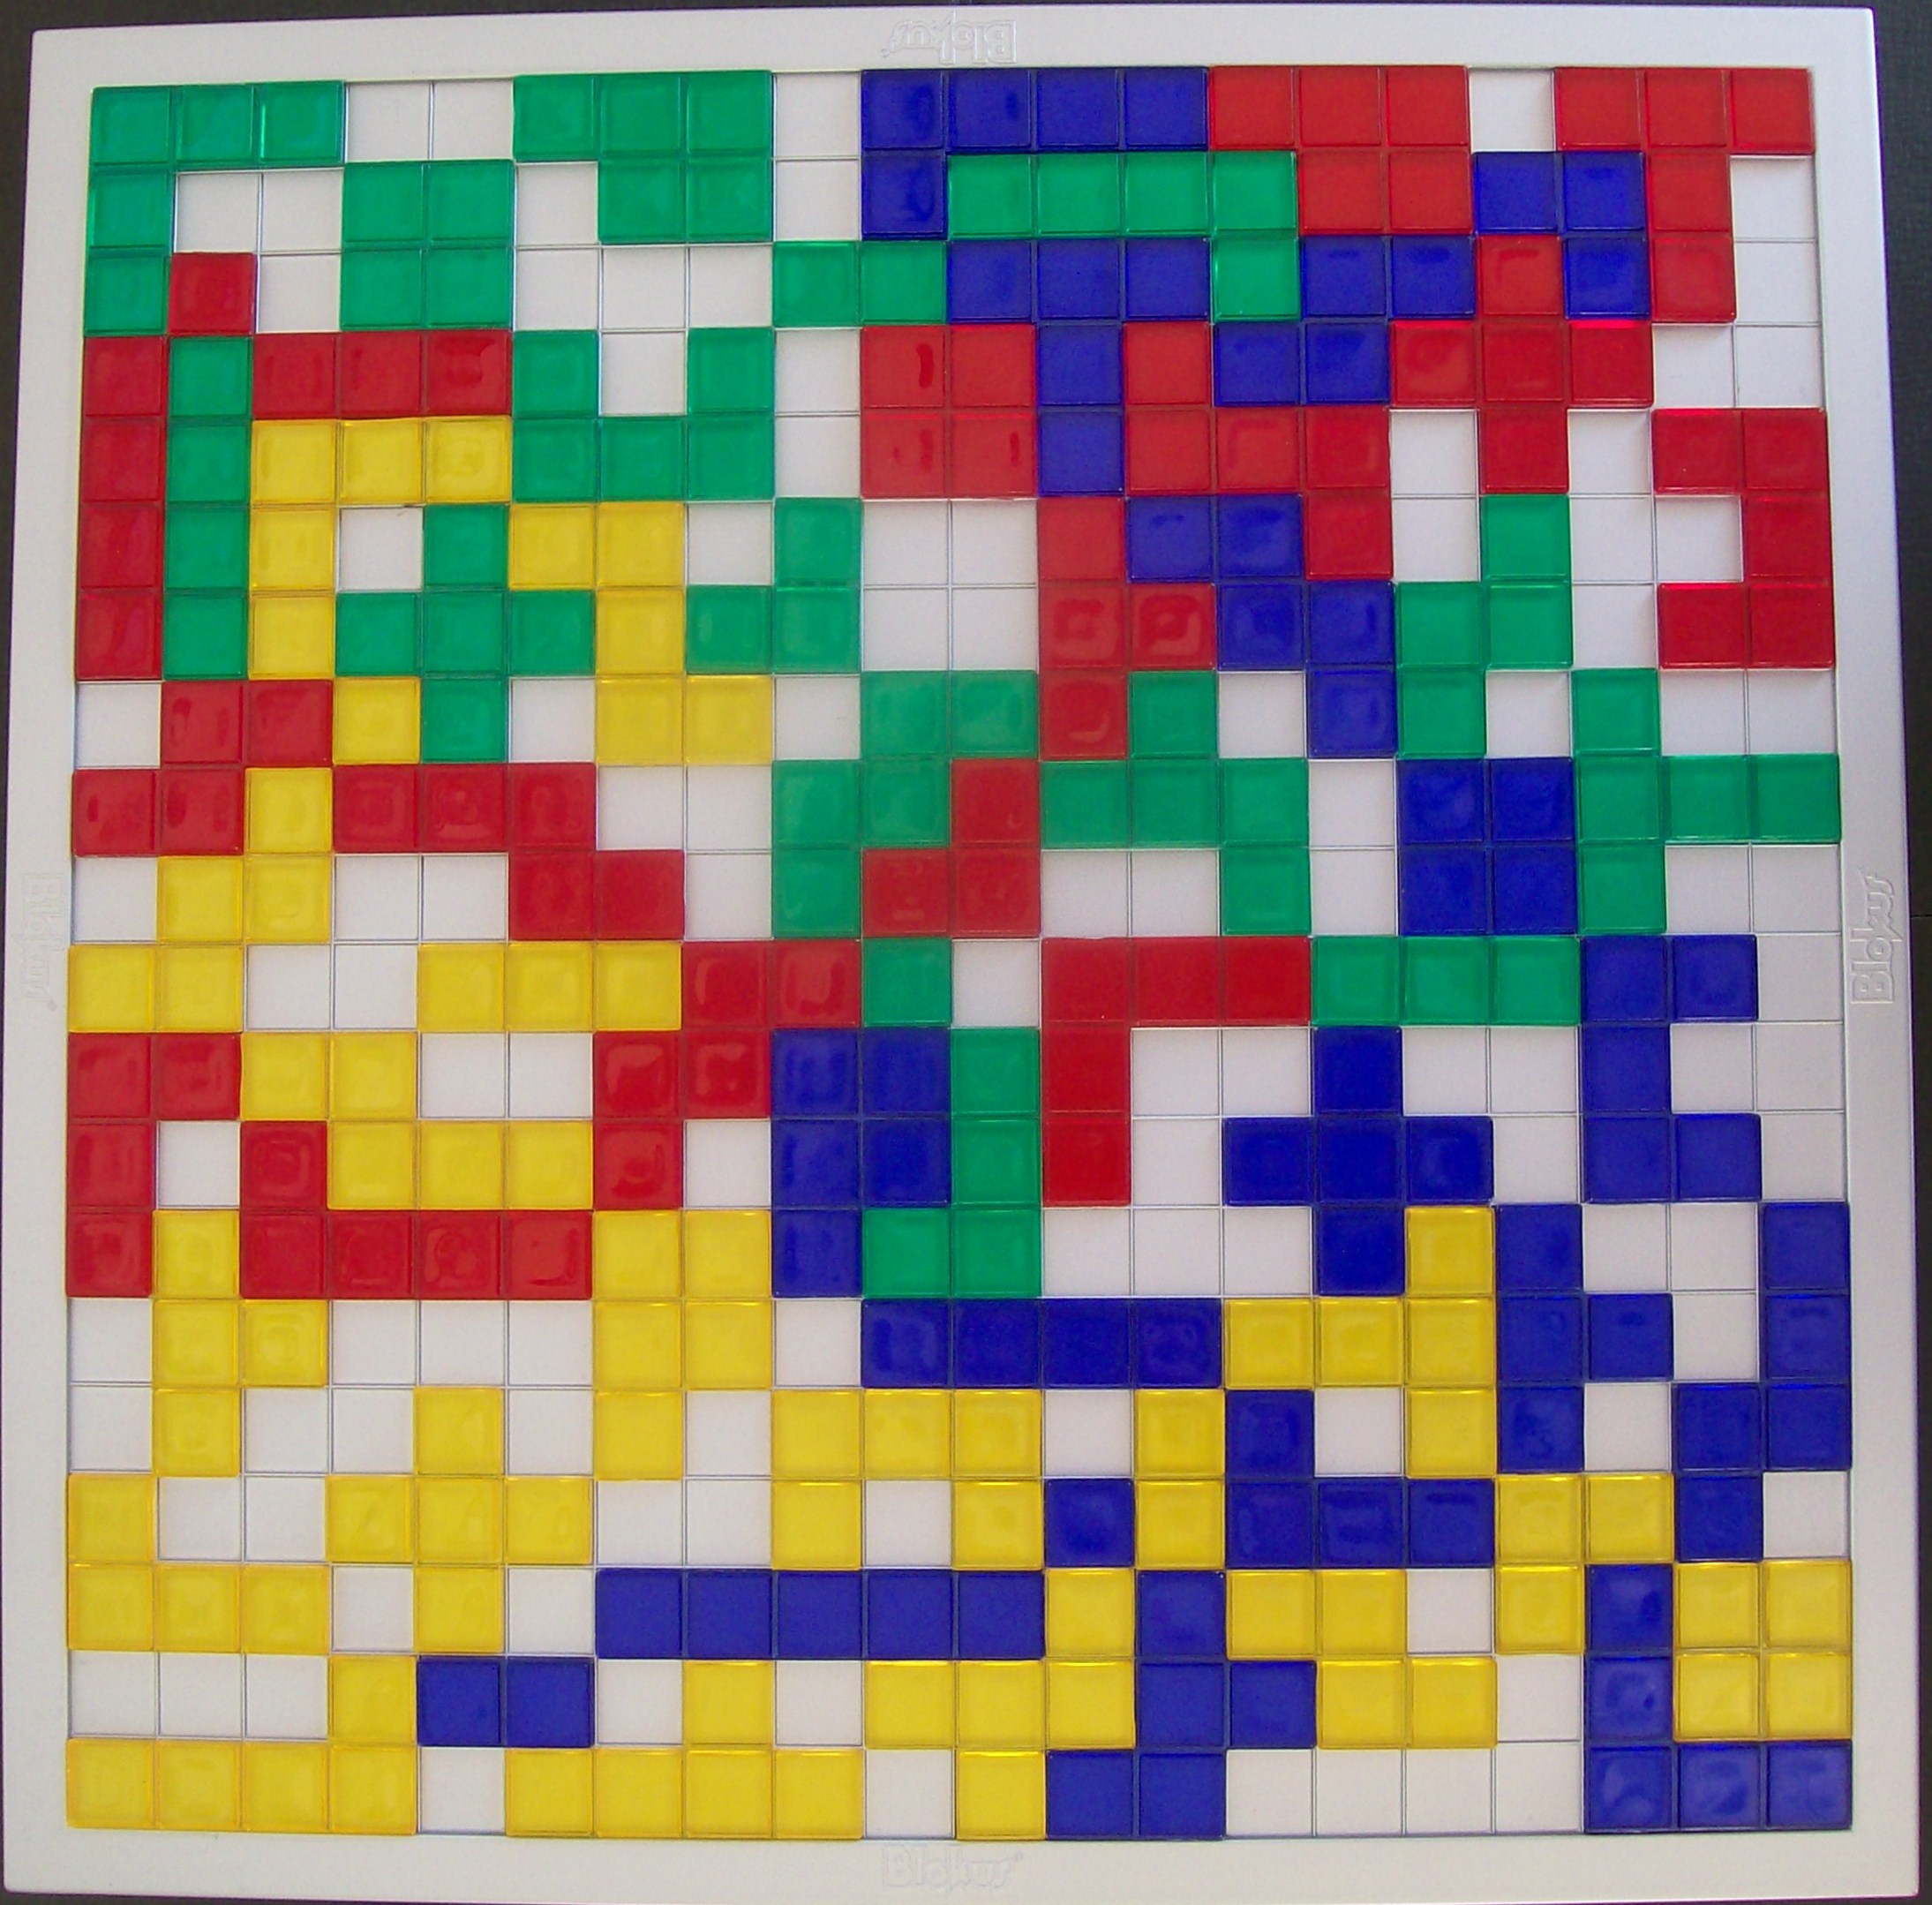 Blokus makes the leap from board game to app - CNET